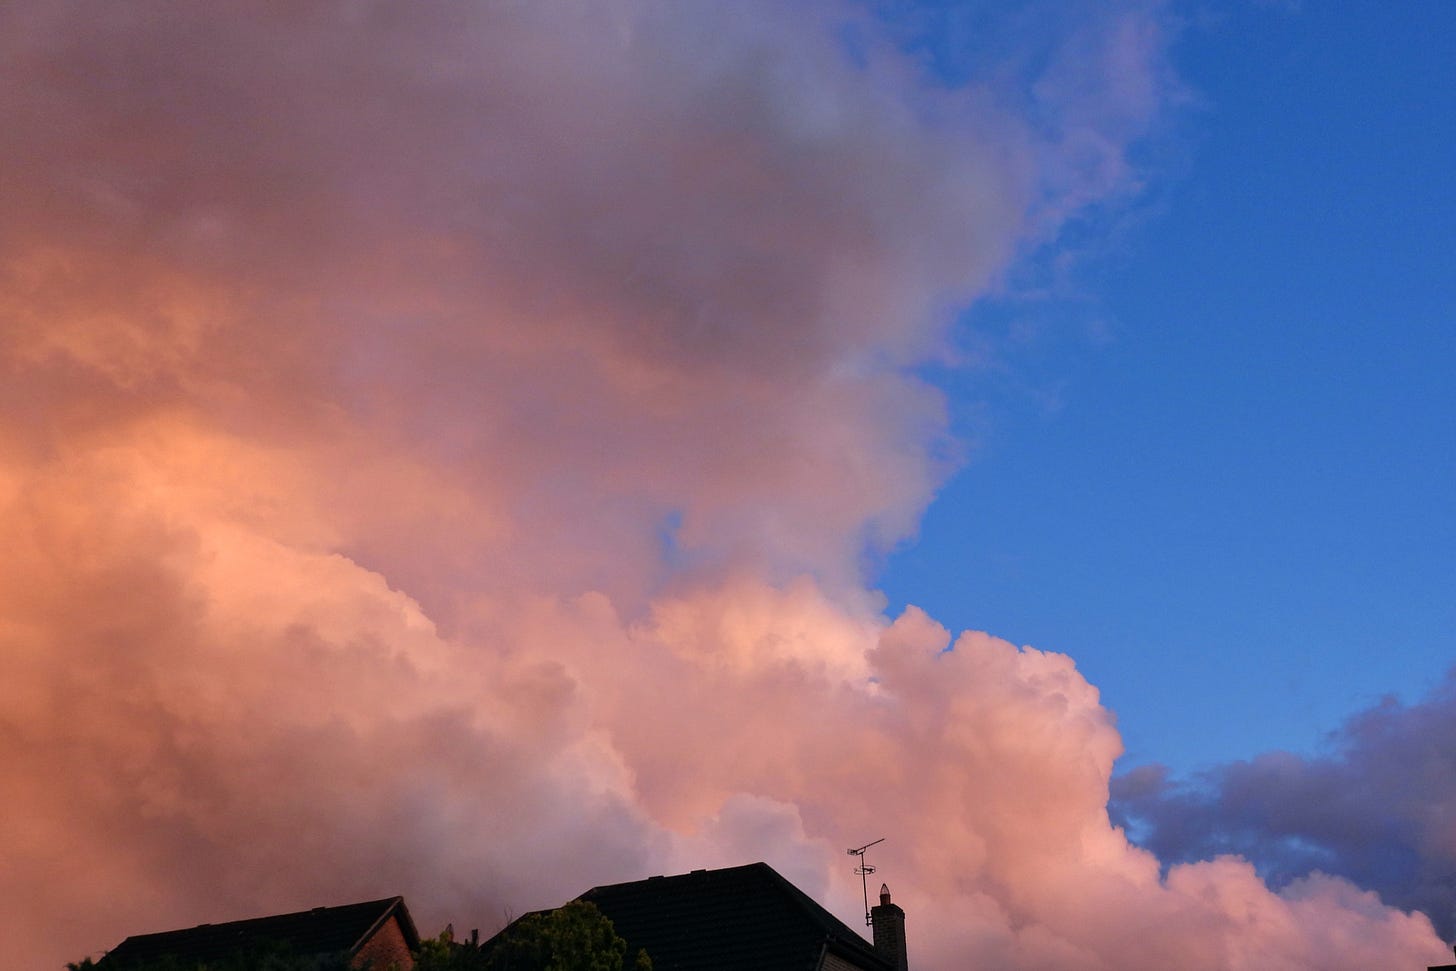 Looking up at the sky showing cumulonimbus clouds against a blue sky. The cloud is glowing with a peachy light from the sunset. House roofs are visible in the bottom of the image.